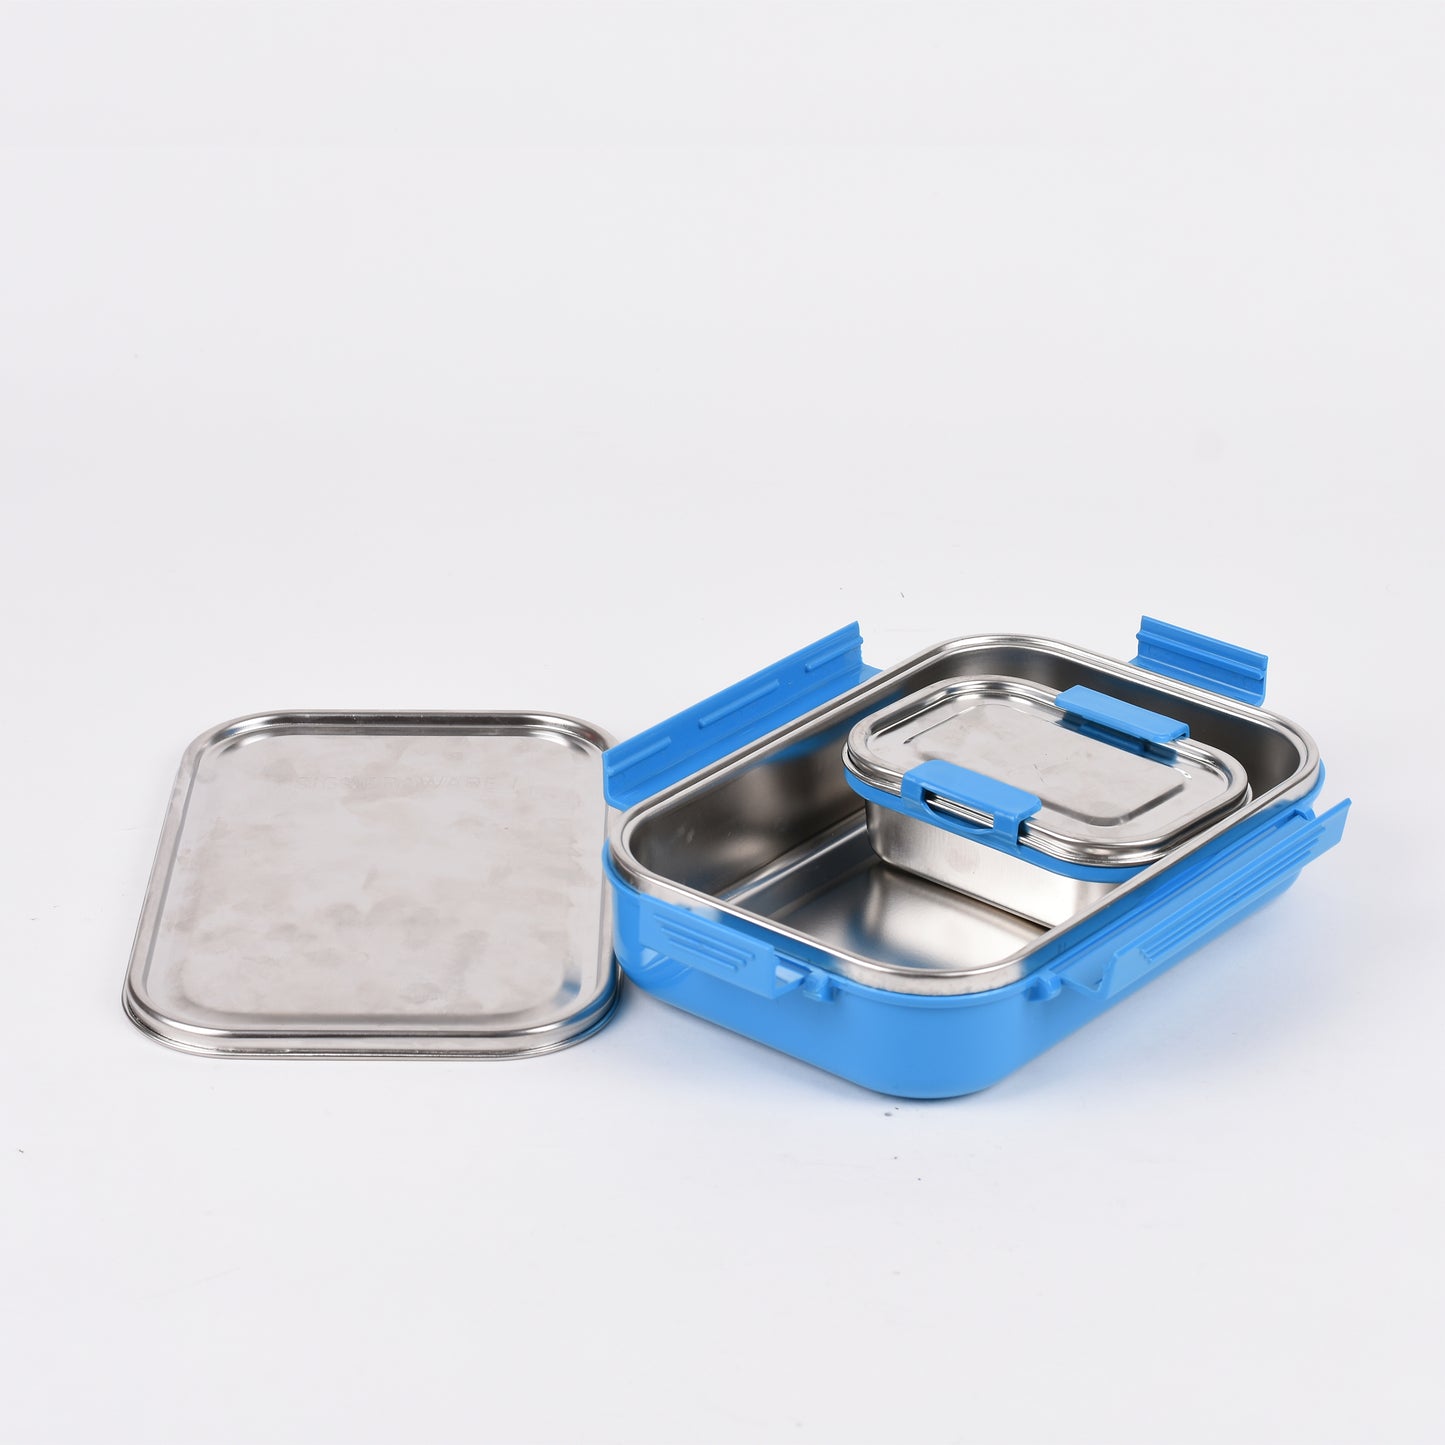 Signoraware - All Steel Stainless Steel With Steel Lid Lunch Box Set Of 2Pcs (1Pc-1000ML+1Pc-240ML) Blue - Ghar Sajawat